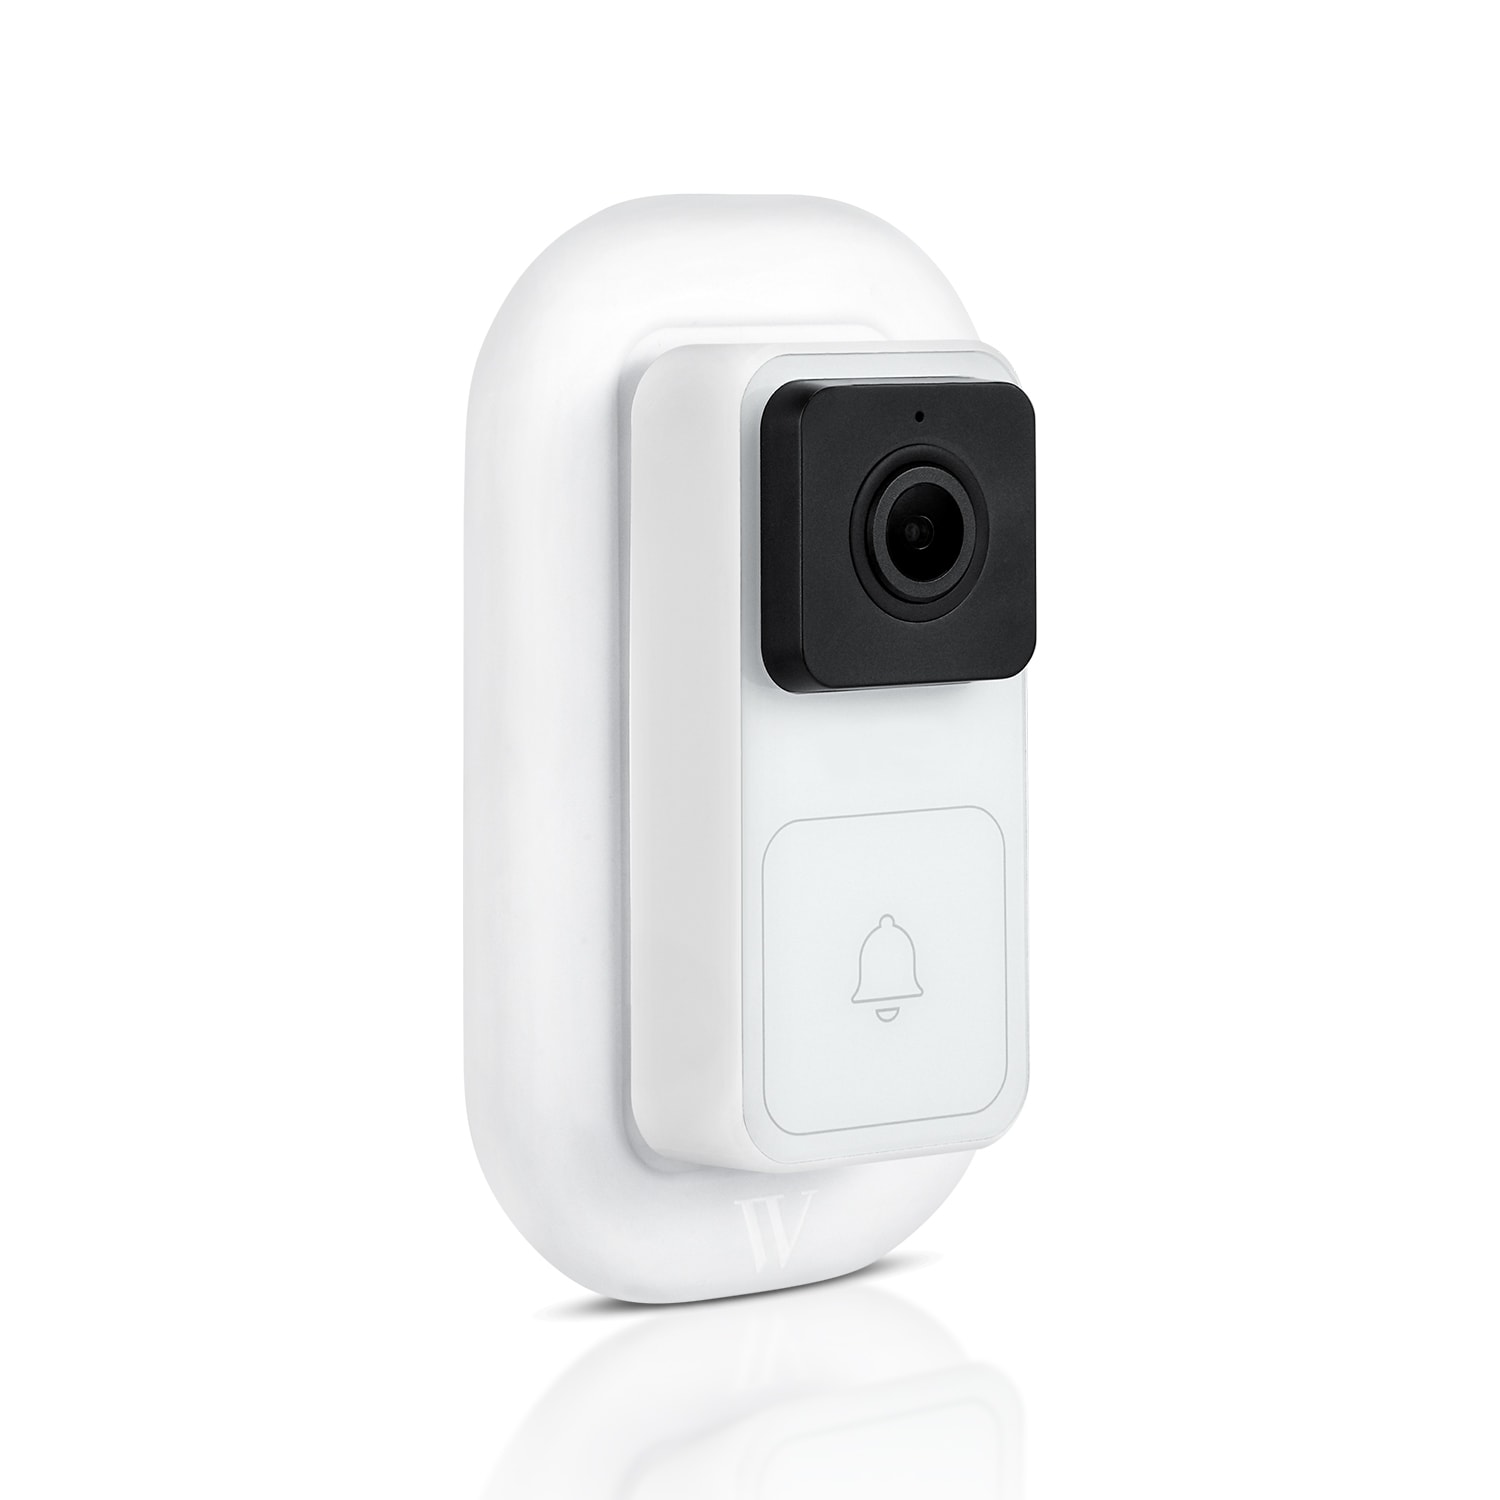 Wasserstein AC Outlet Wall Mount Compatible with Wyze Cam V3 - Reliable Mounting Alternative for Your Cameras (White)